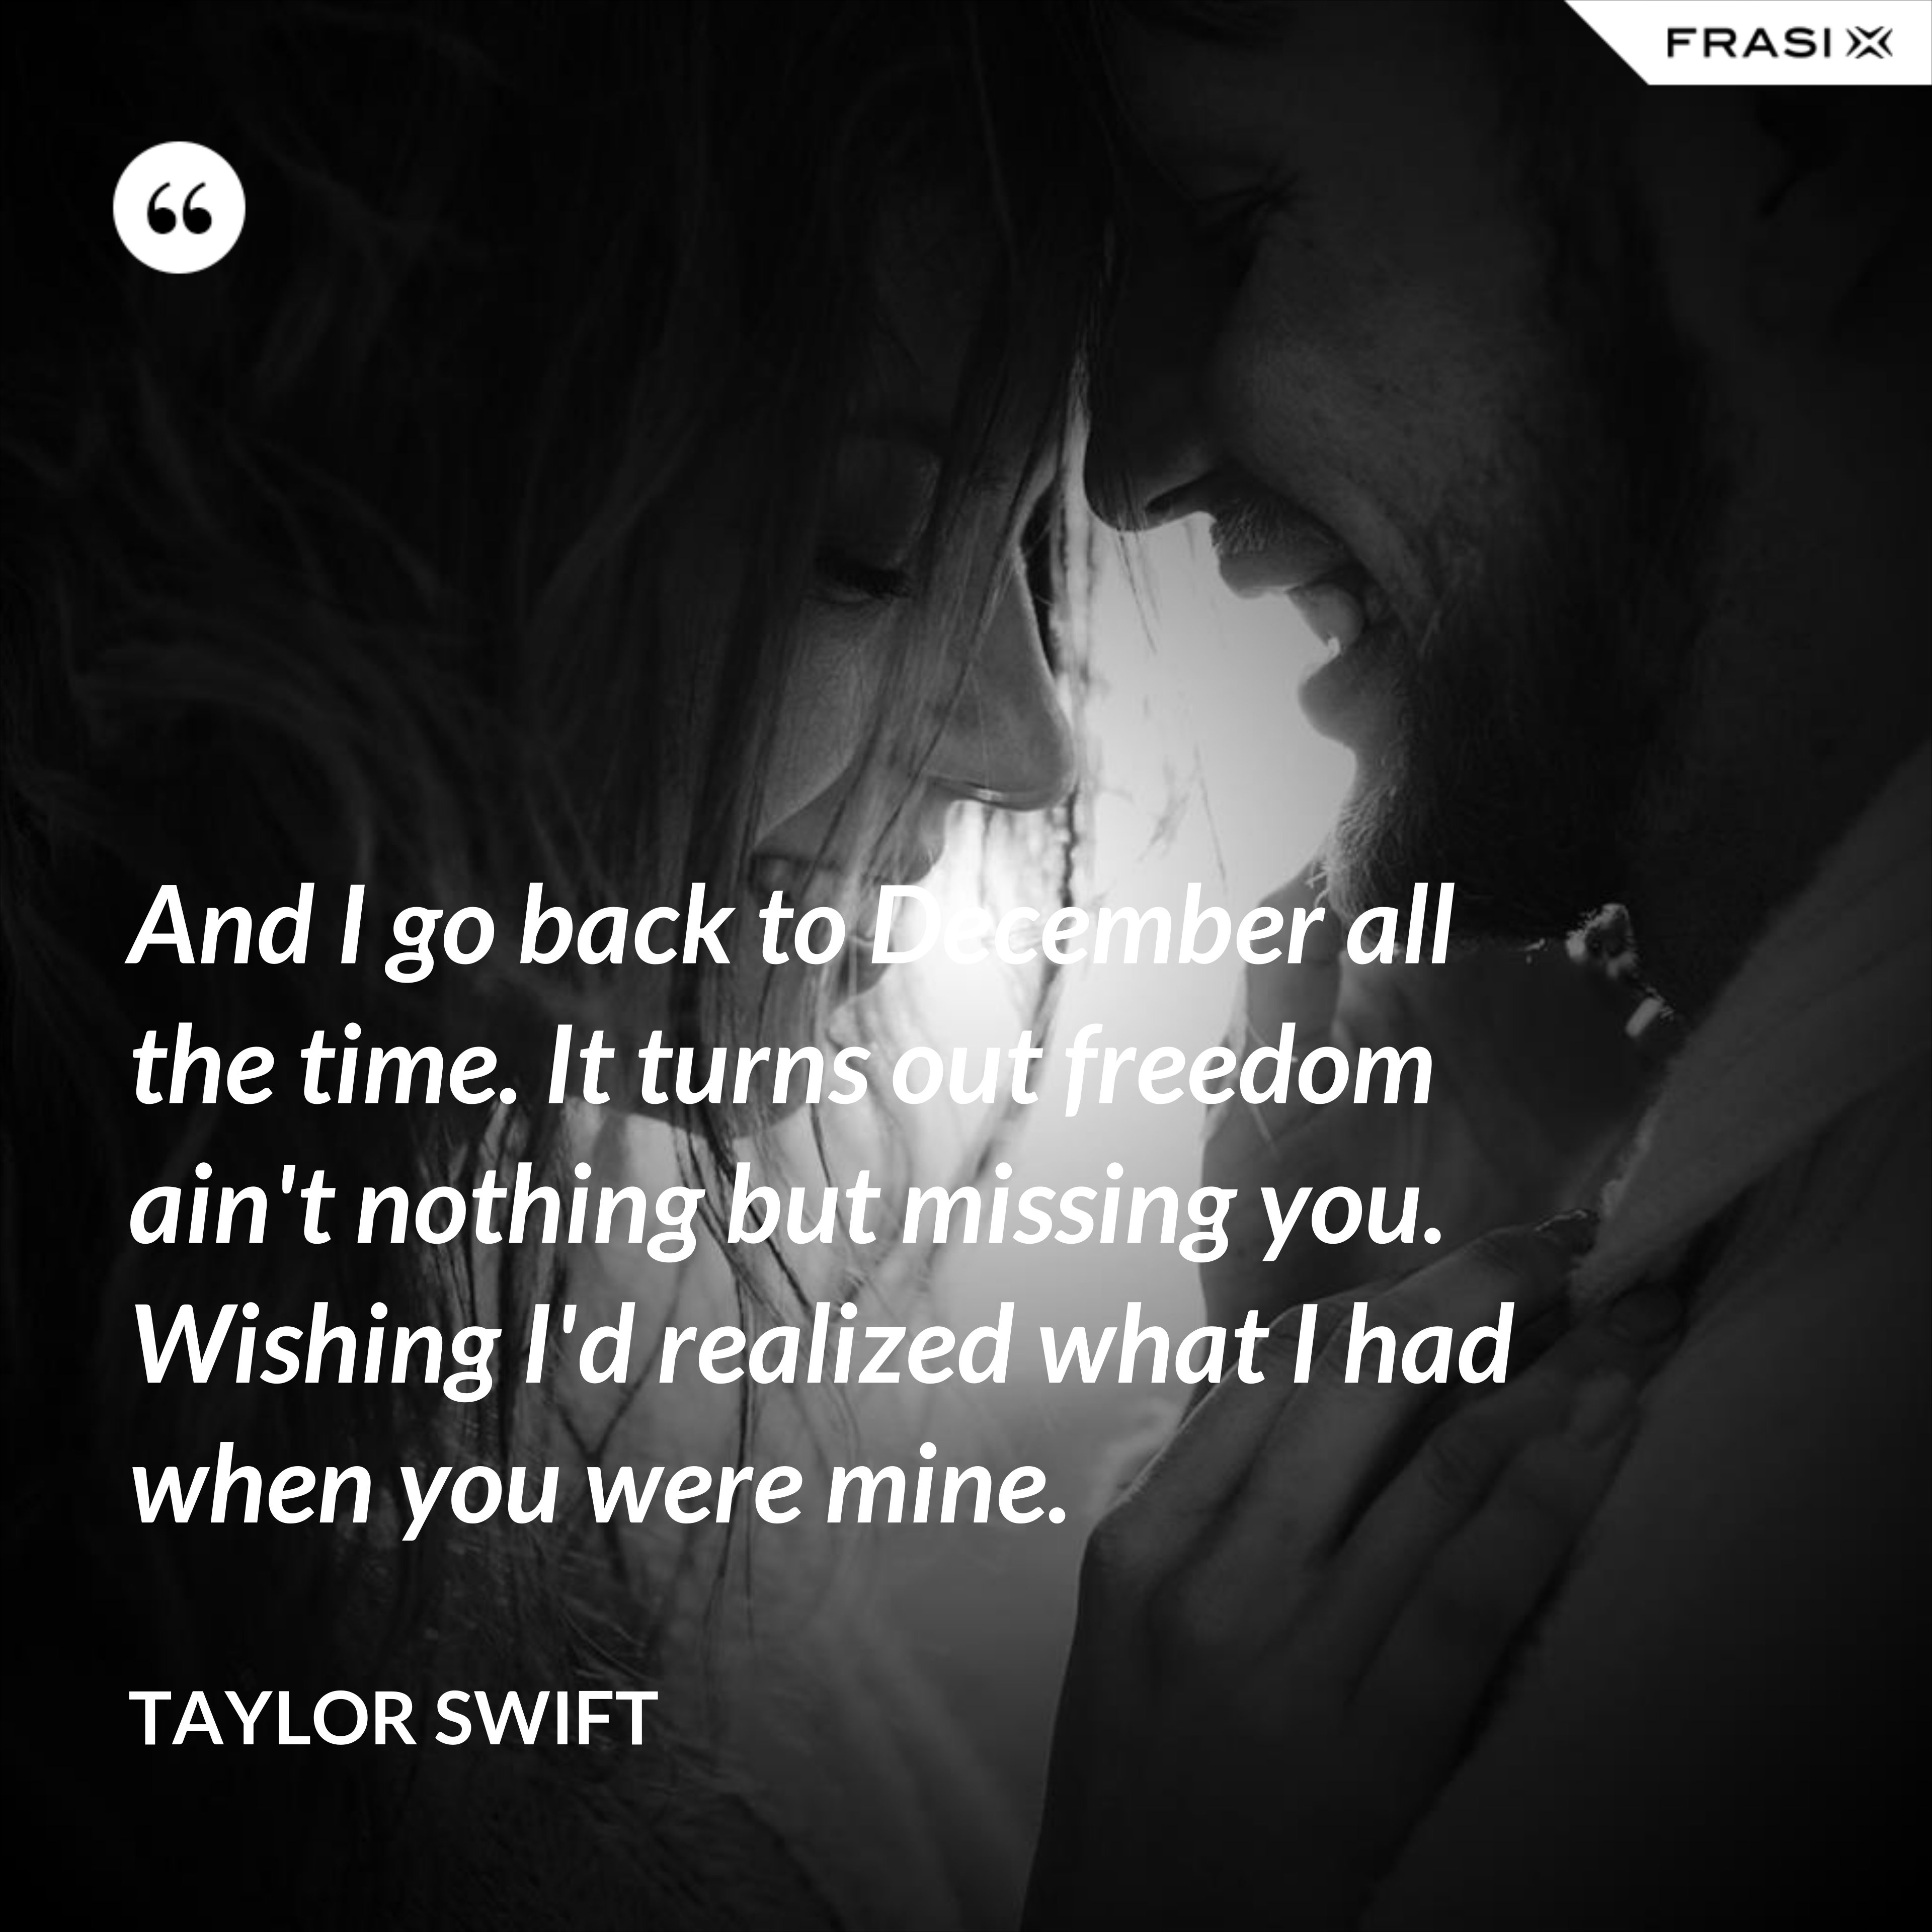 And I go back to December all the time. It turns out freedom ain't nothing but missing you. Wishing I'd realized what I had when you were mine. - Taylor Swift